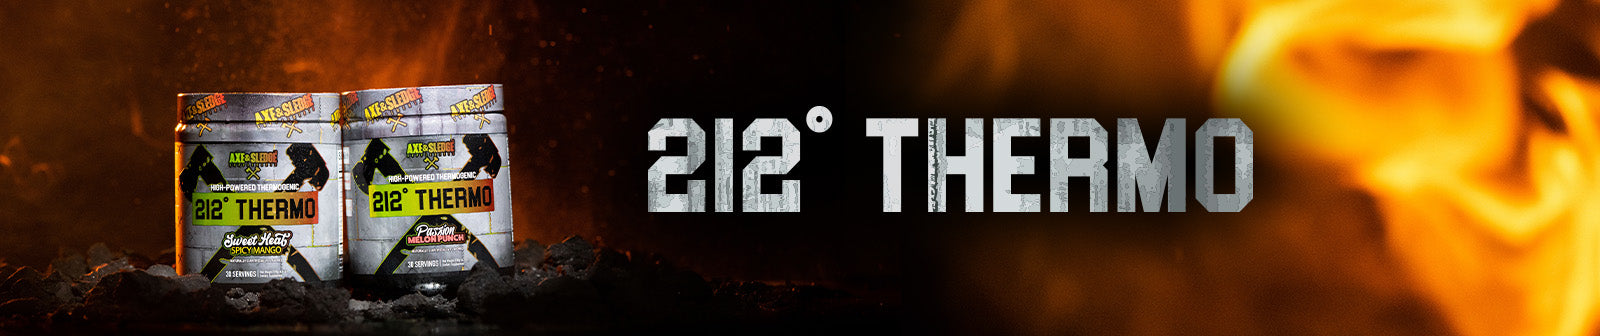 212° Thermo Collection